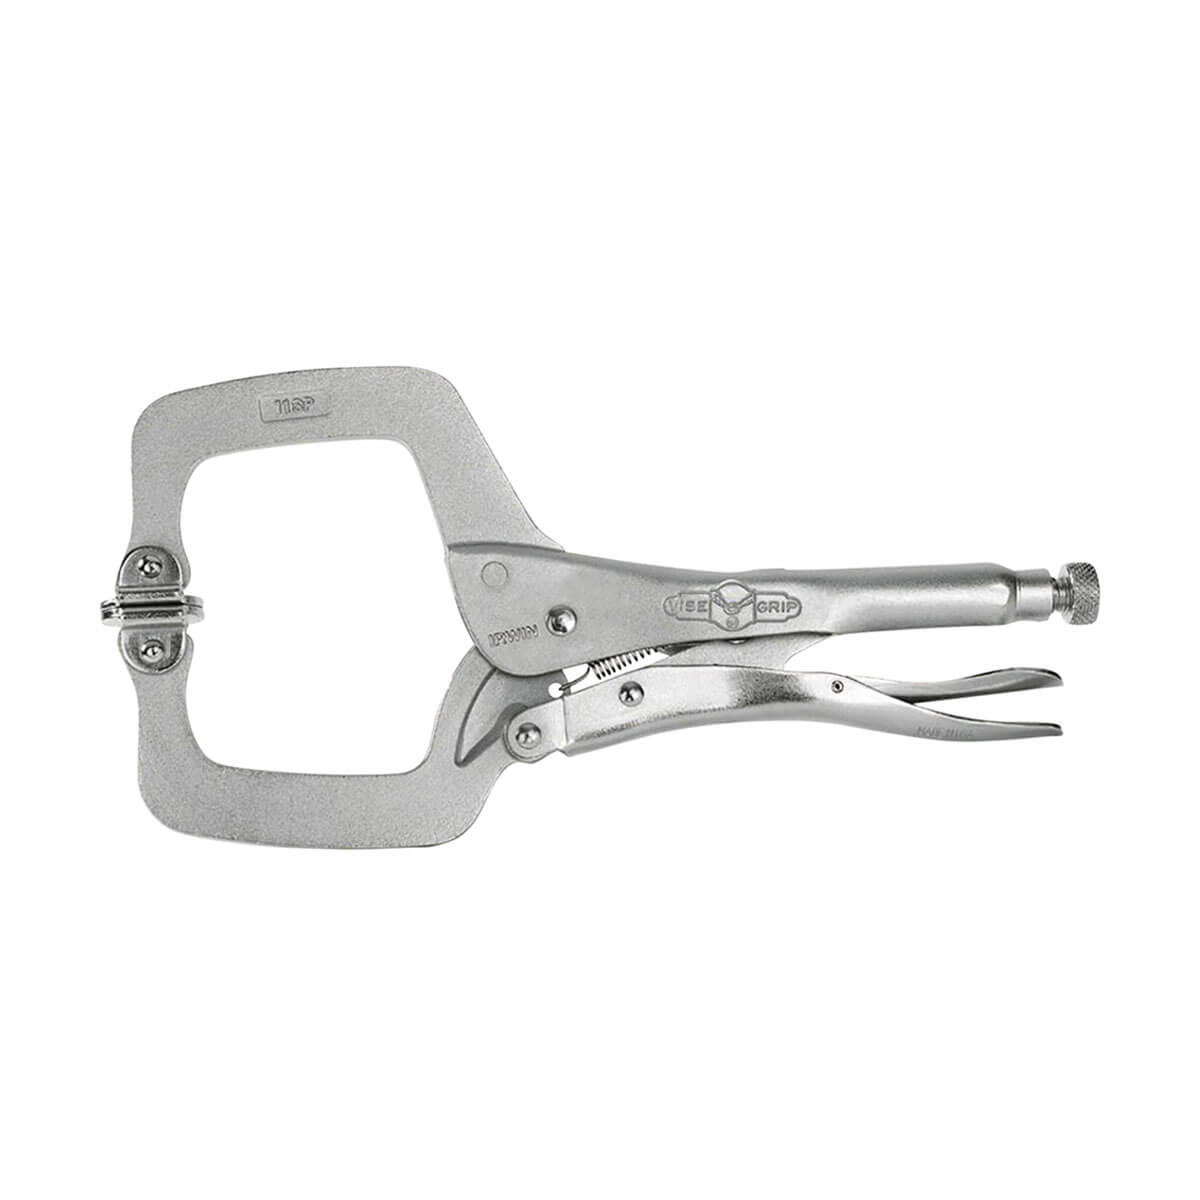 Vise-Grip 20-11SP Locking Clamp with Swivel Pads